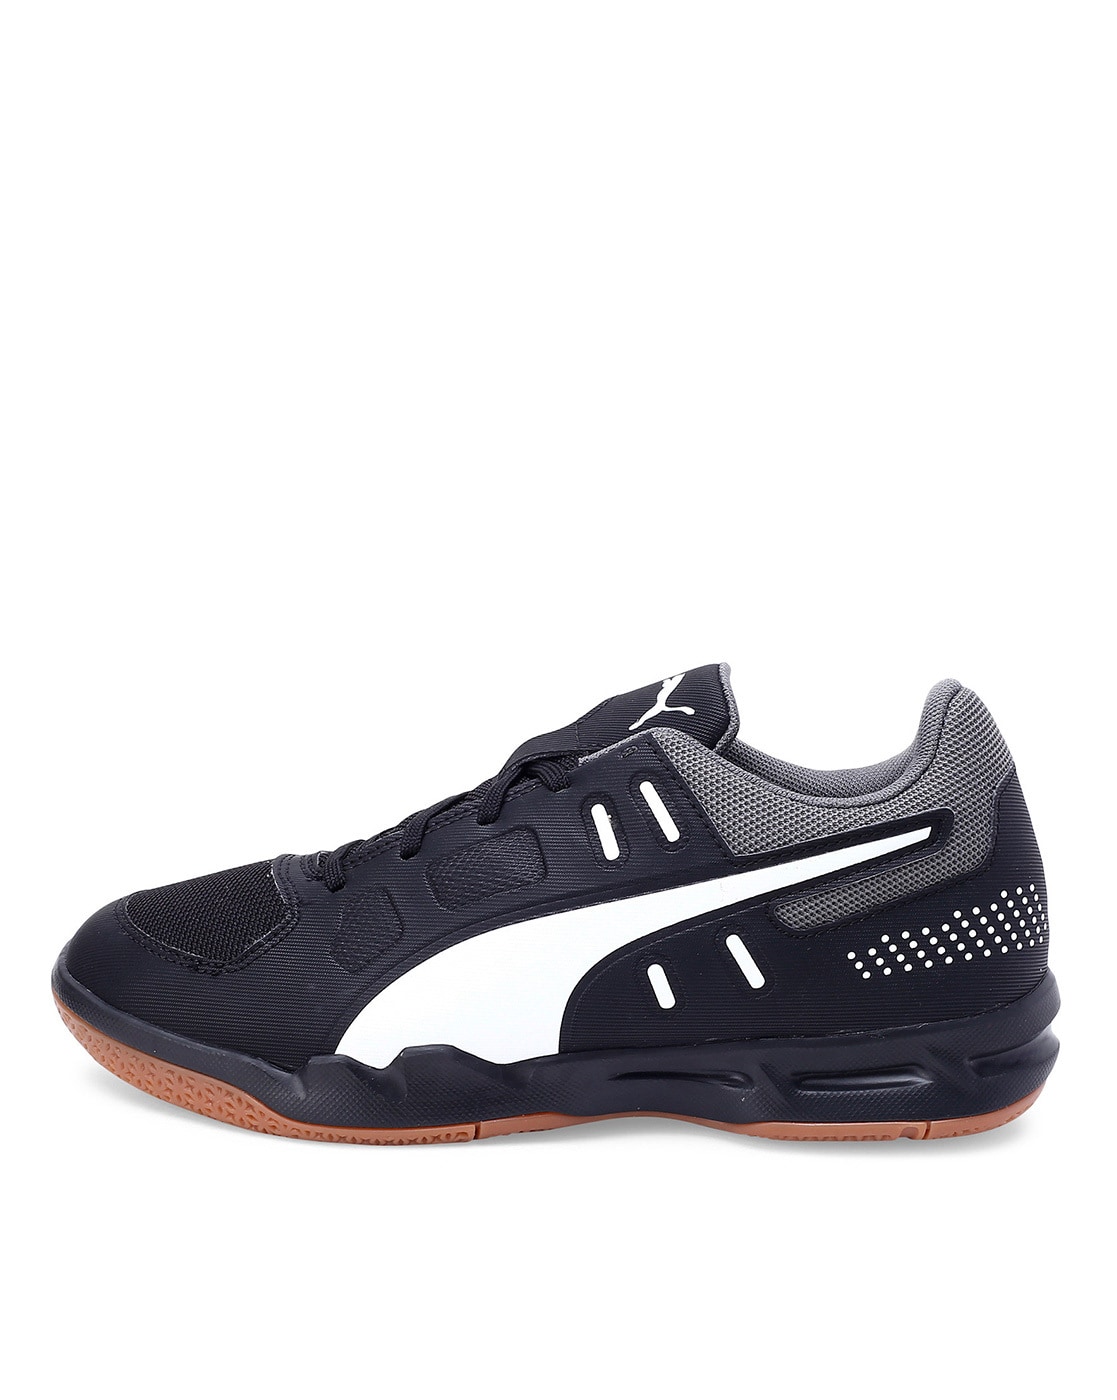 Buy Black Sports\u0026Outdoor Shoes for Boys 